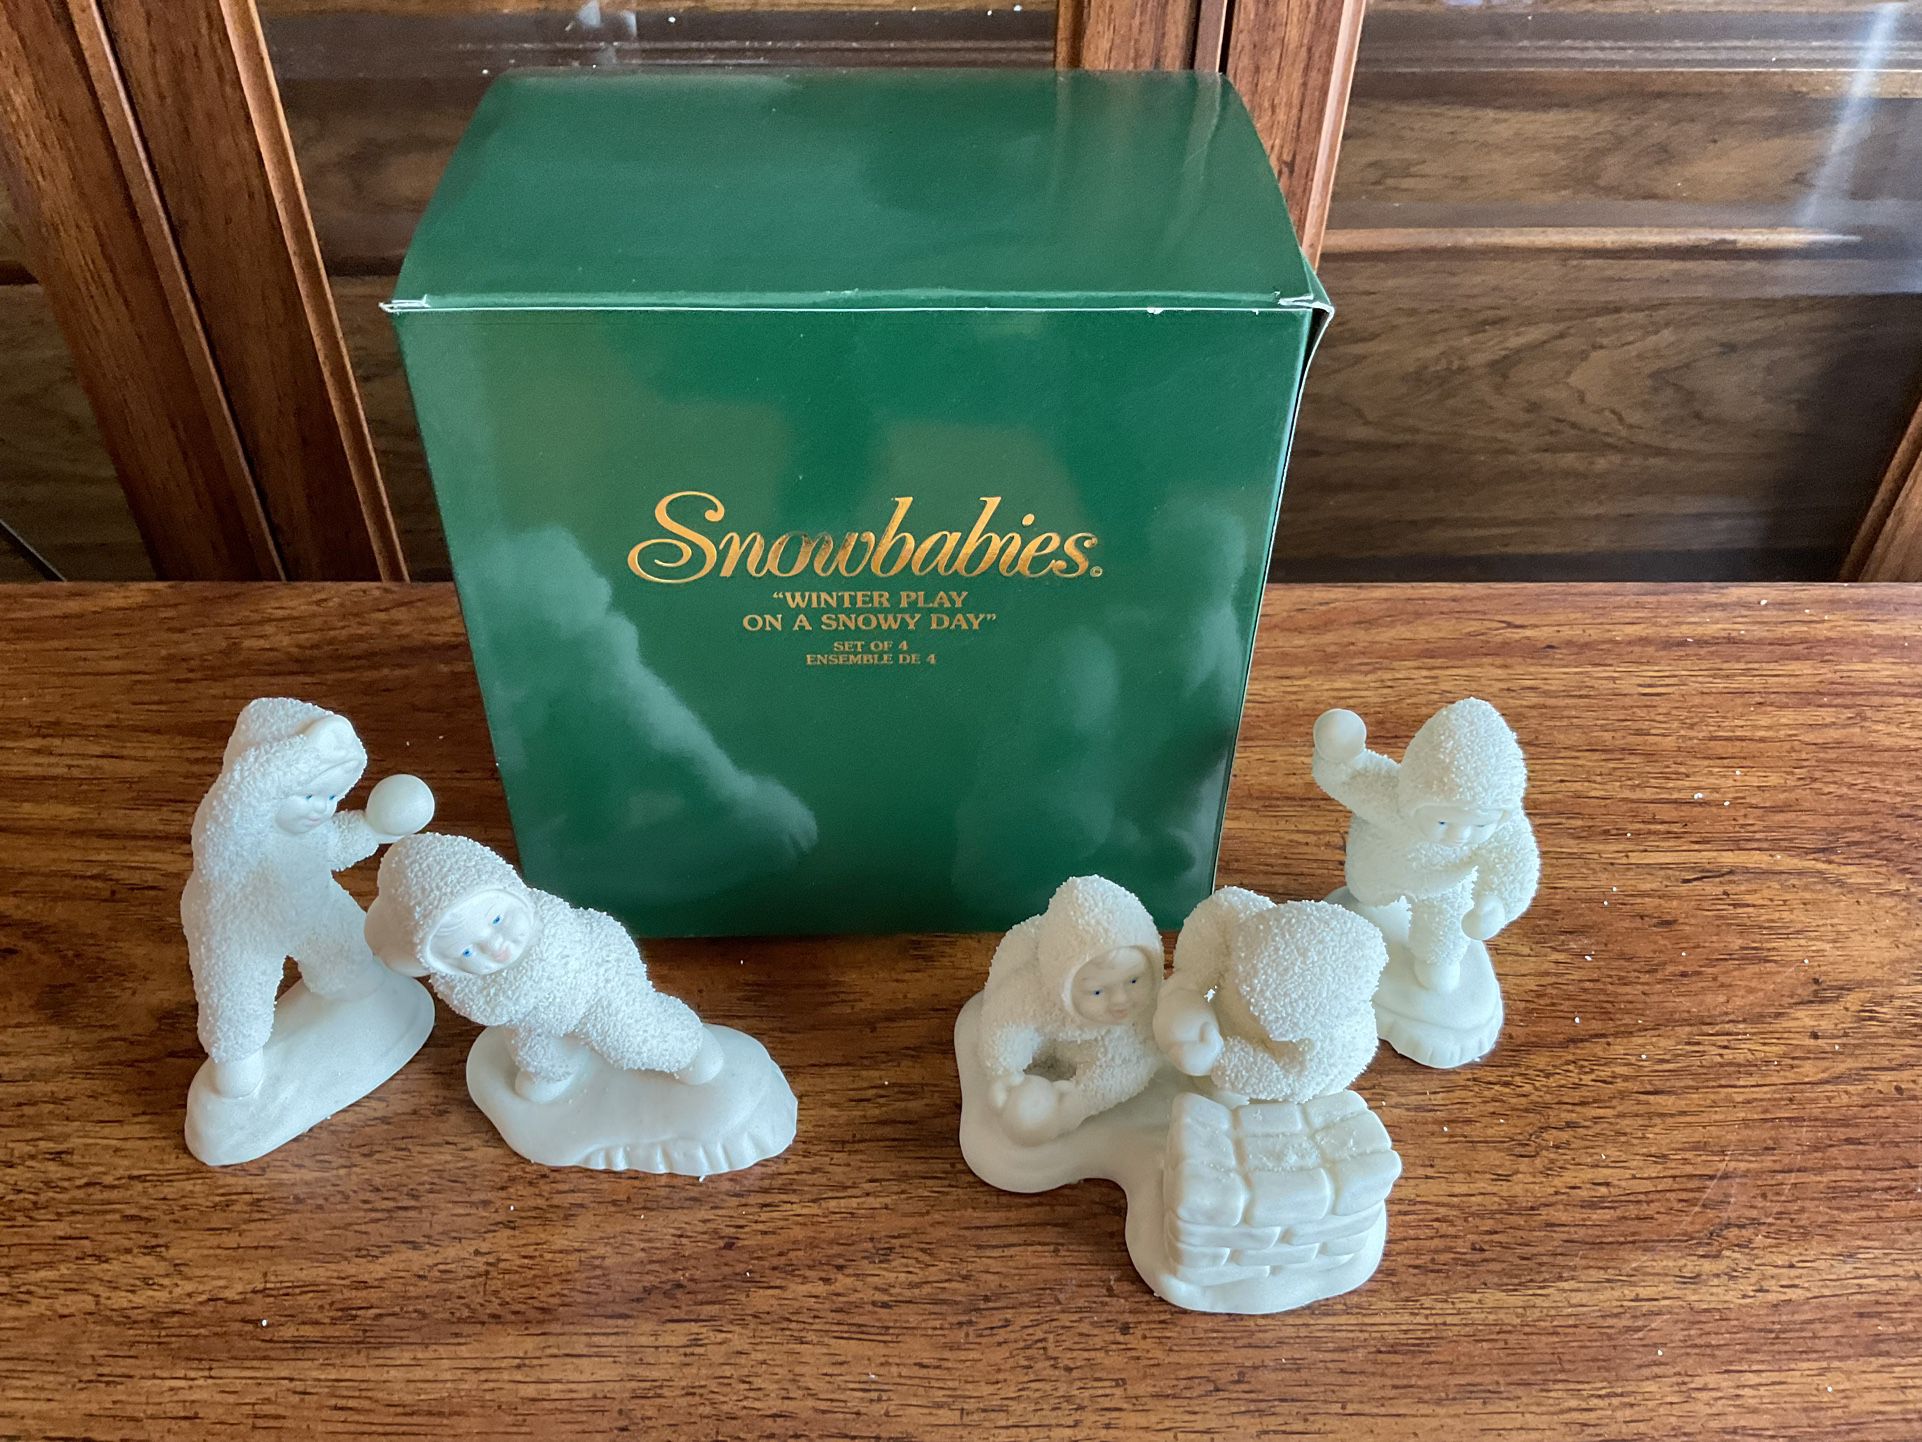 Department 56 Snowbabies “Winter Play On A Snowy Day” in original box- RETIRED